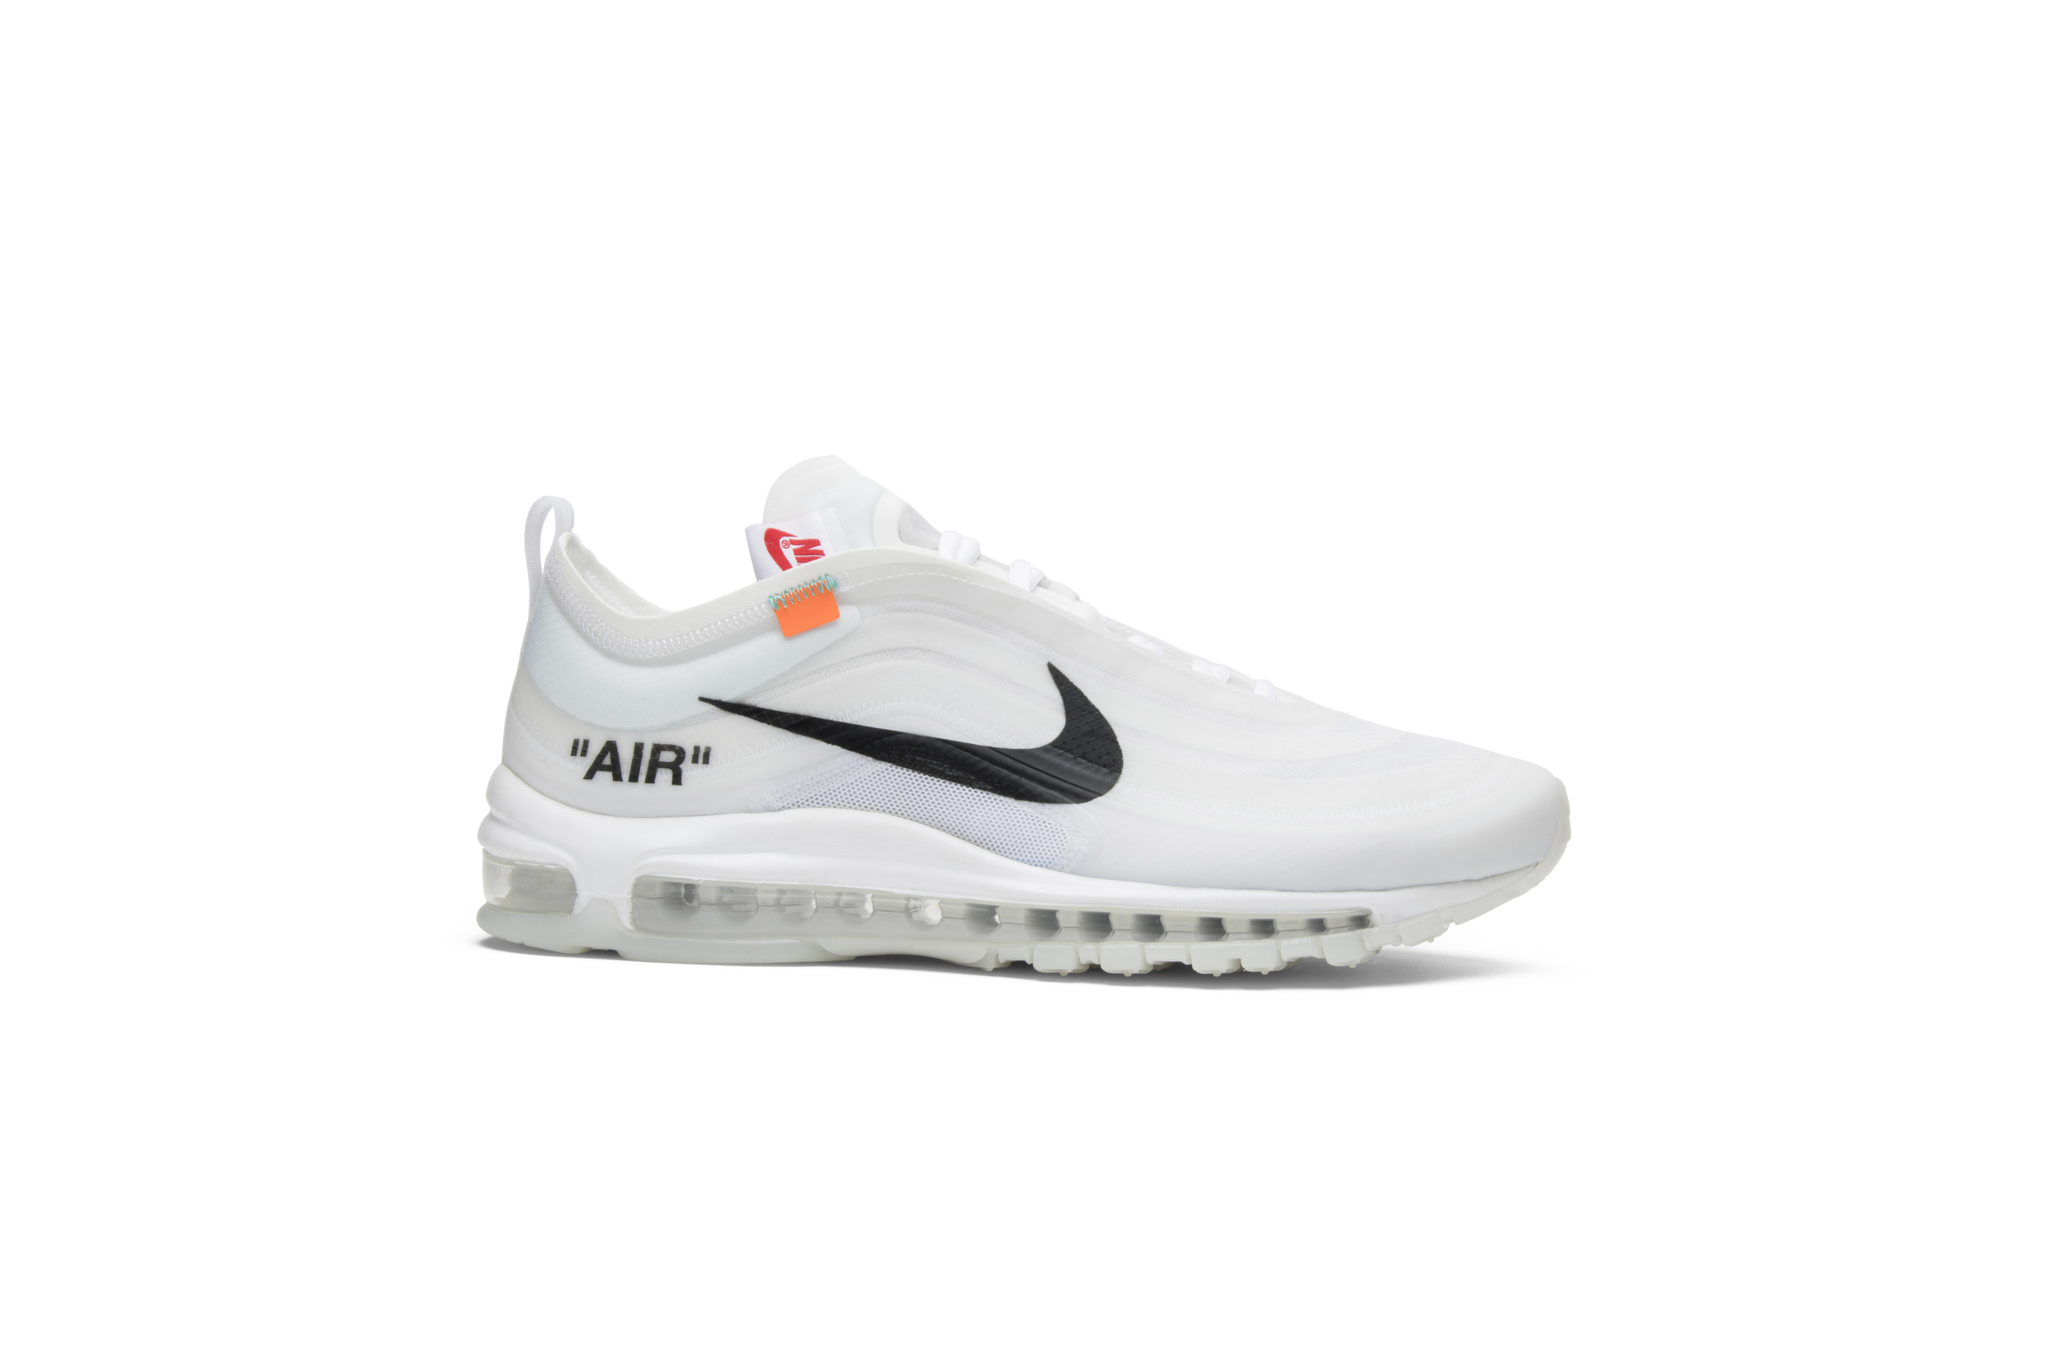 Eigenwijs golf onregelmatig Nike Air Max Day 2018: Air Max Shoes With The Highest Resale Value